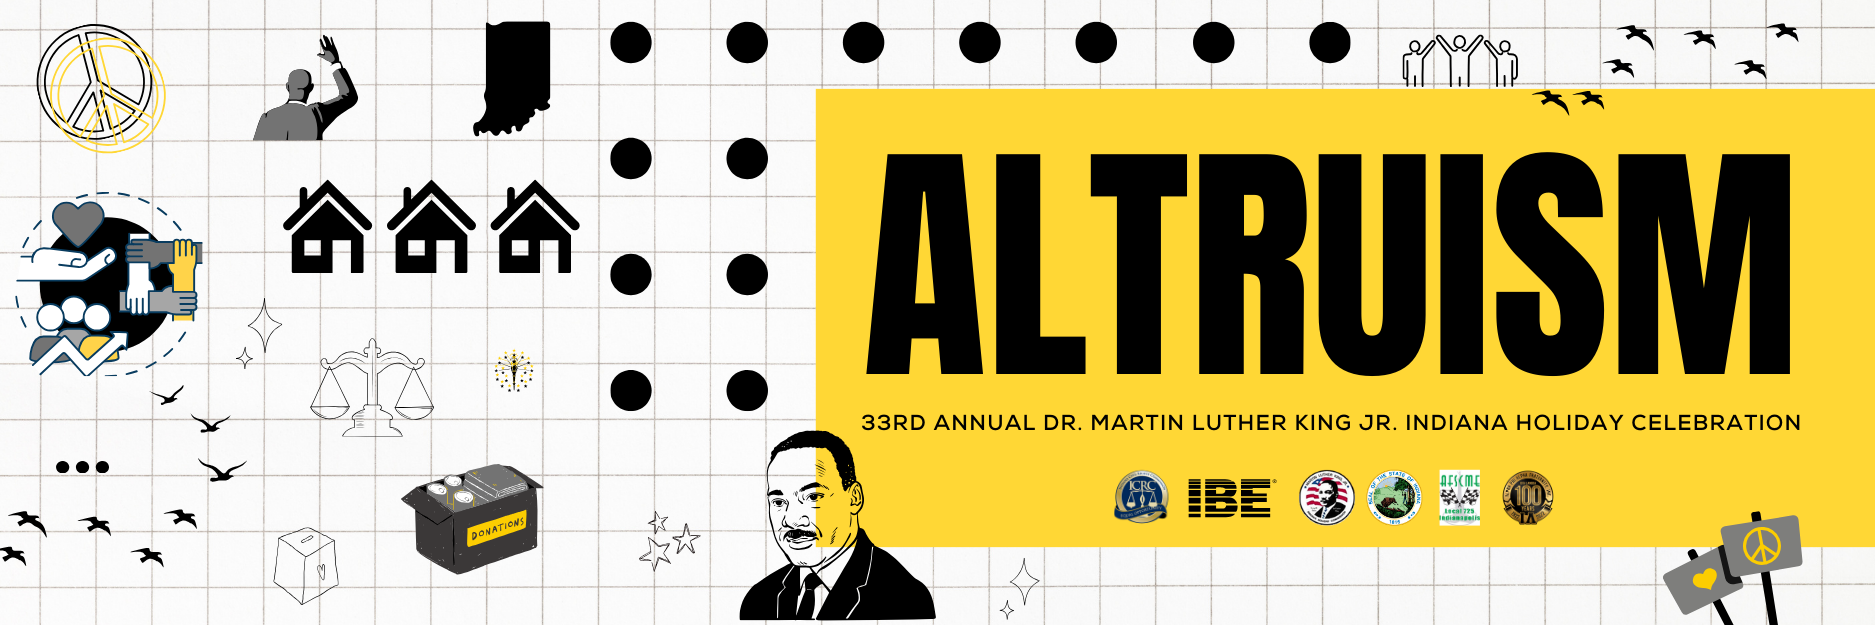 Event logo that says "Altruism 33rd Annual Dr. Martin Luther King, Jr. Indiana Holiday Celebration